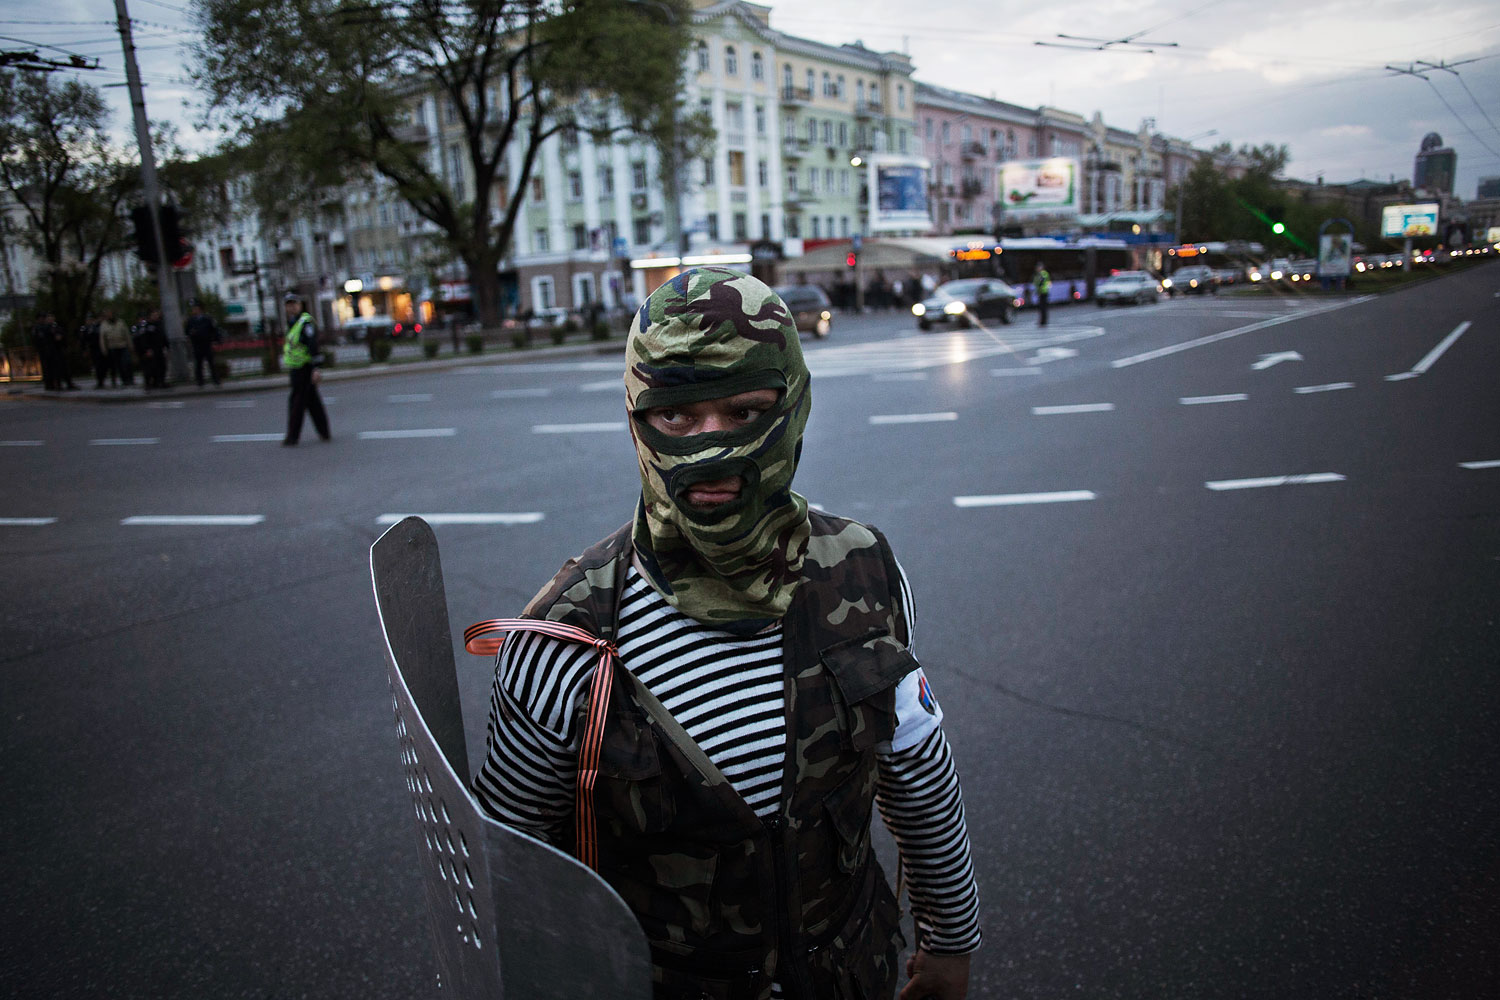 A pro-Russian activist is seen while holding a shield after clashing with pro Ukrainians during a pro Ukraine rally in Donetsk, Ukraine, Monday, April 28, 2014.